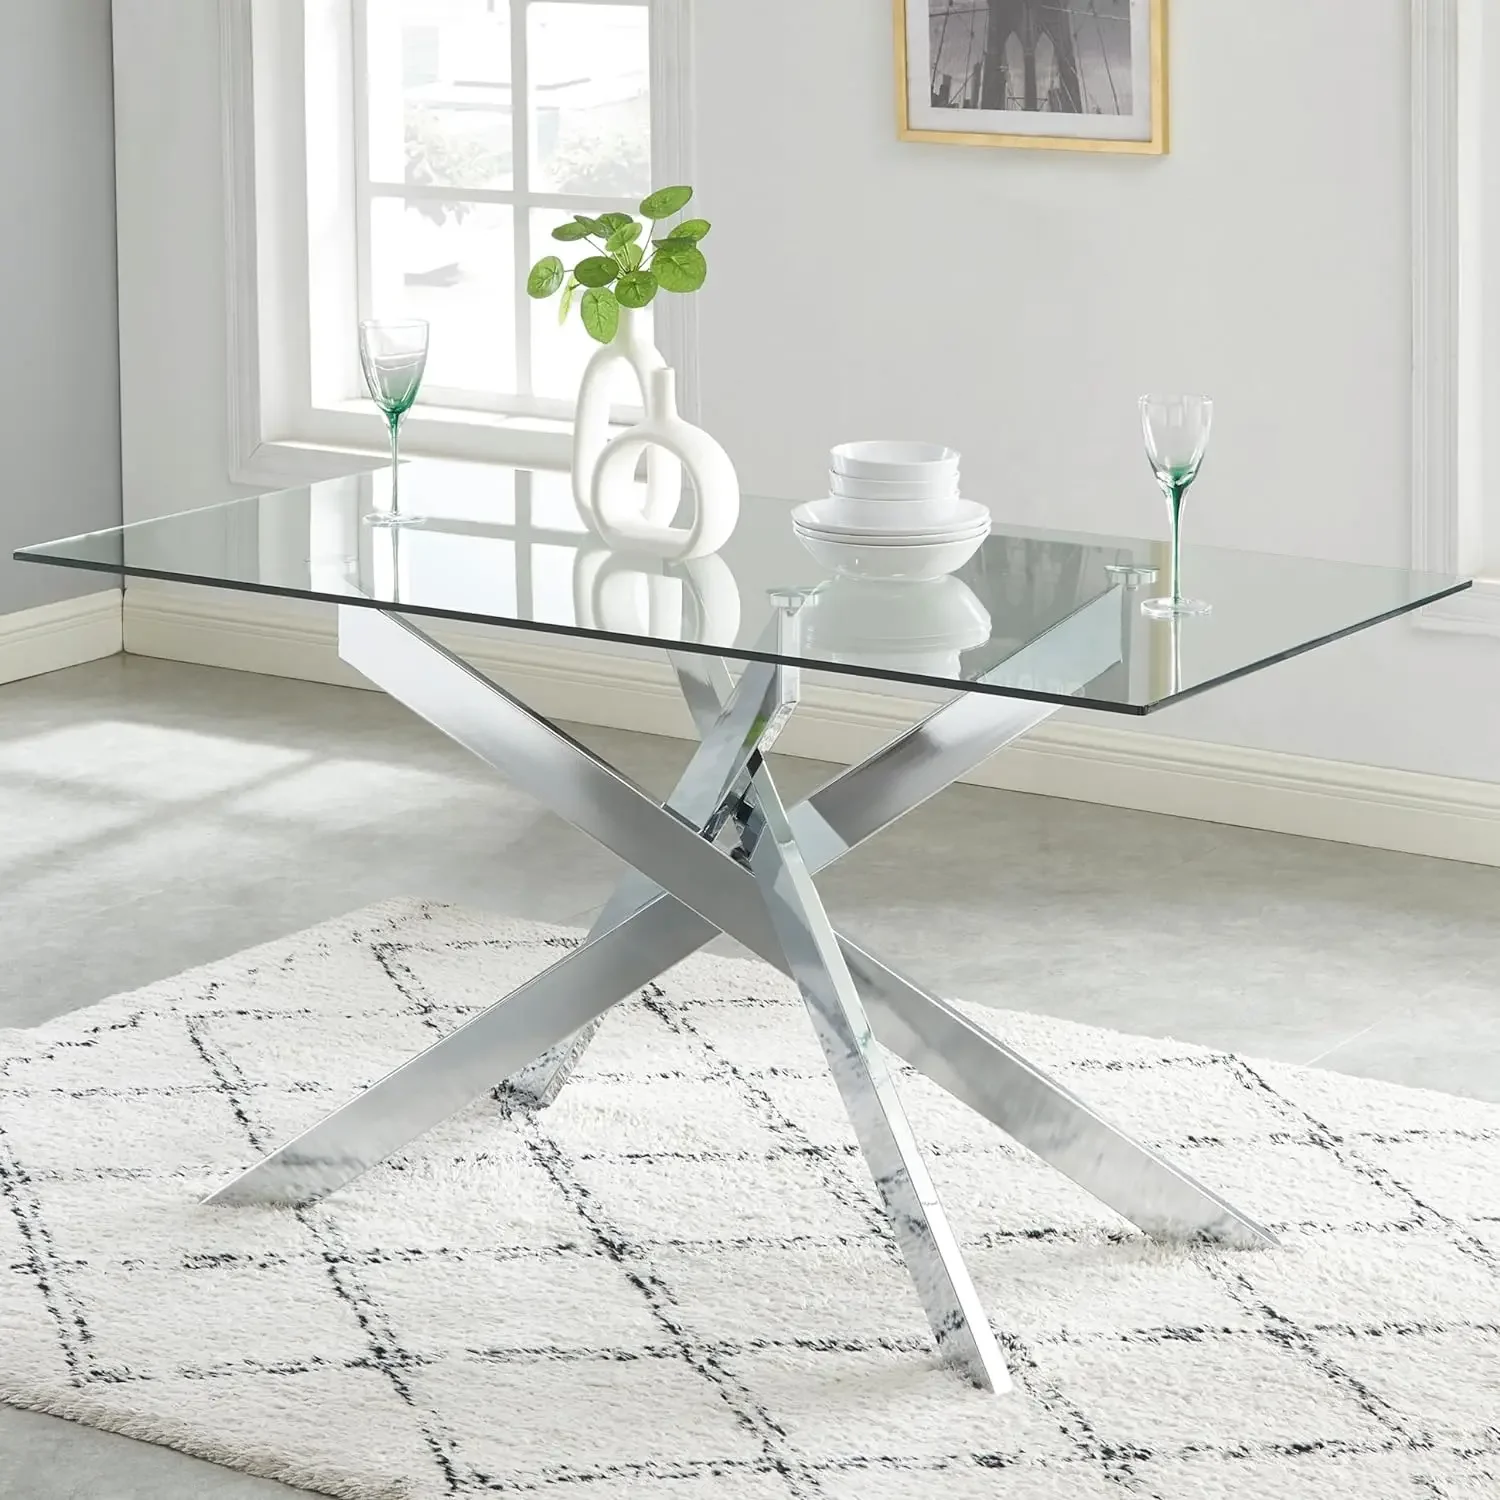 

58.5”Rectangle Glass Dining Table,Tempered Glass Tabletop and Metal Tubular Legs,Modern Style Table for Home,Kitchen,Dining Room